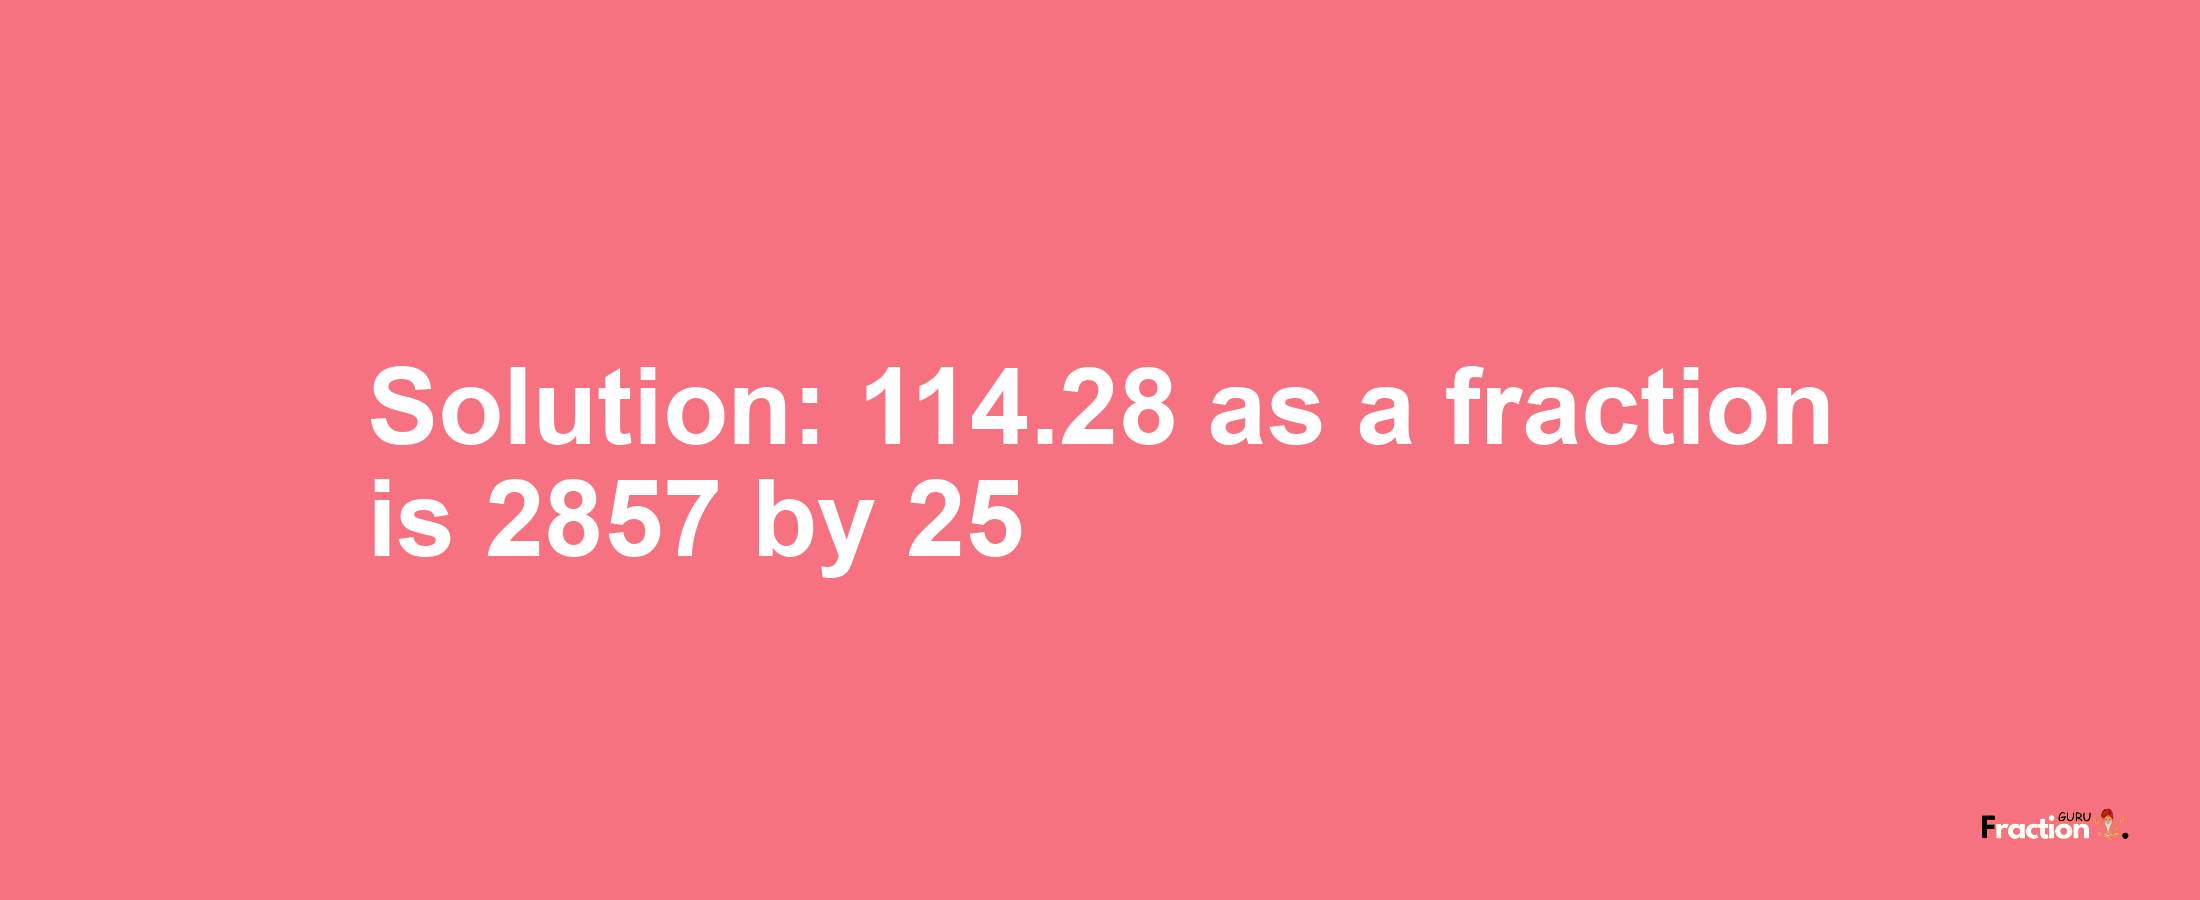 Solution:114.28 as a fraction is 2857/25